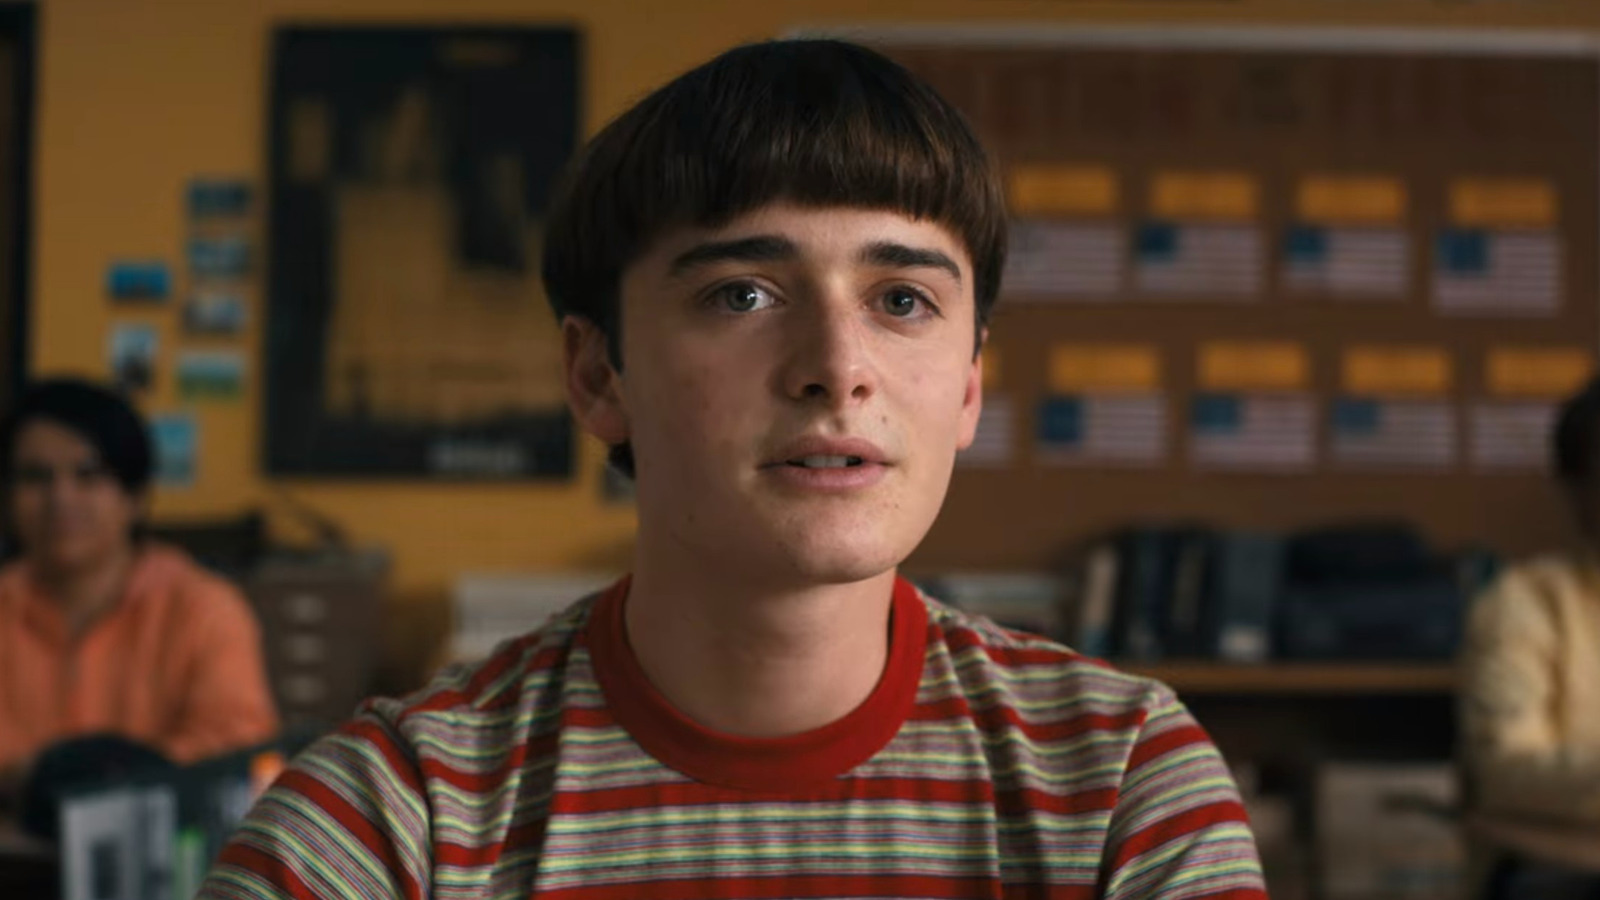 Stranger Things season 4: Will Byers unknowingly created the Upside Down?, TV & Radio, Showbiz & TV